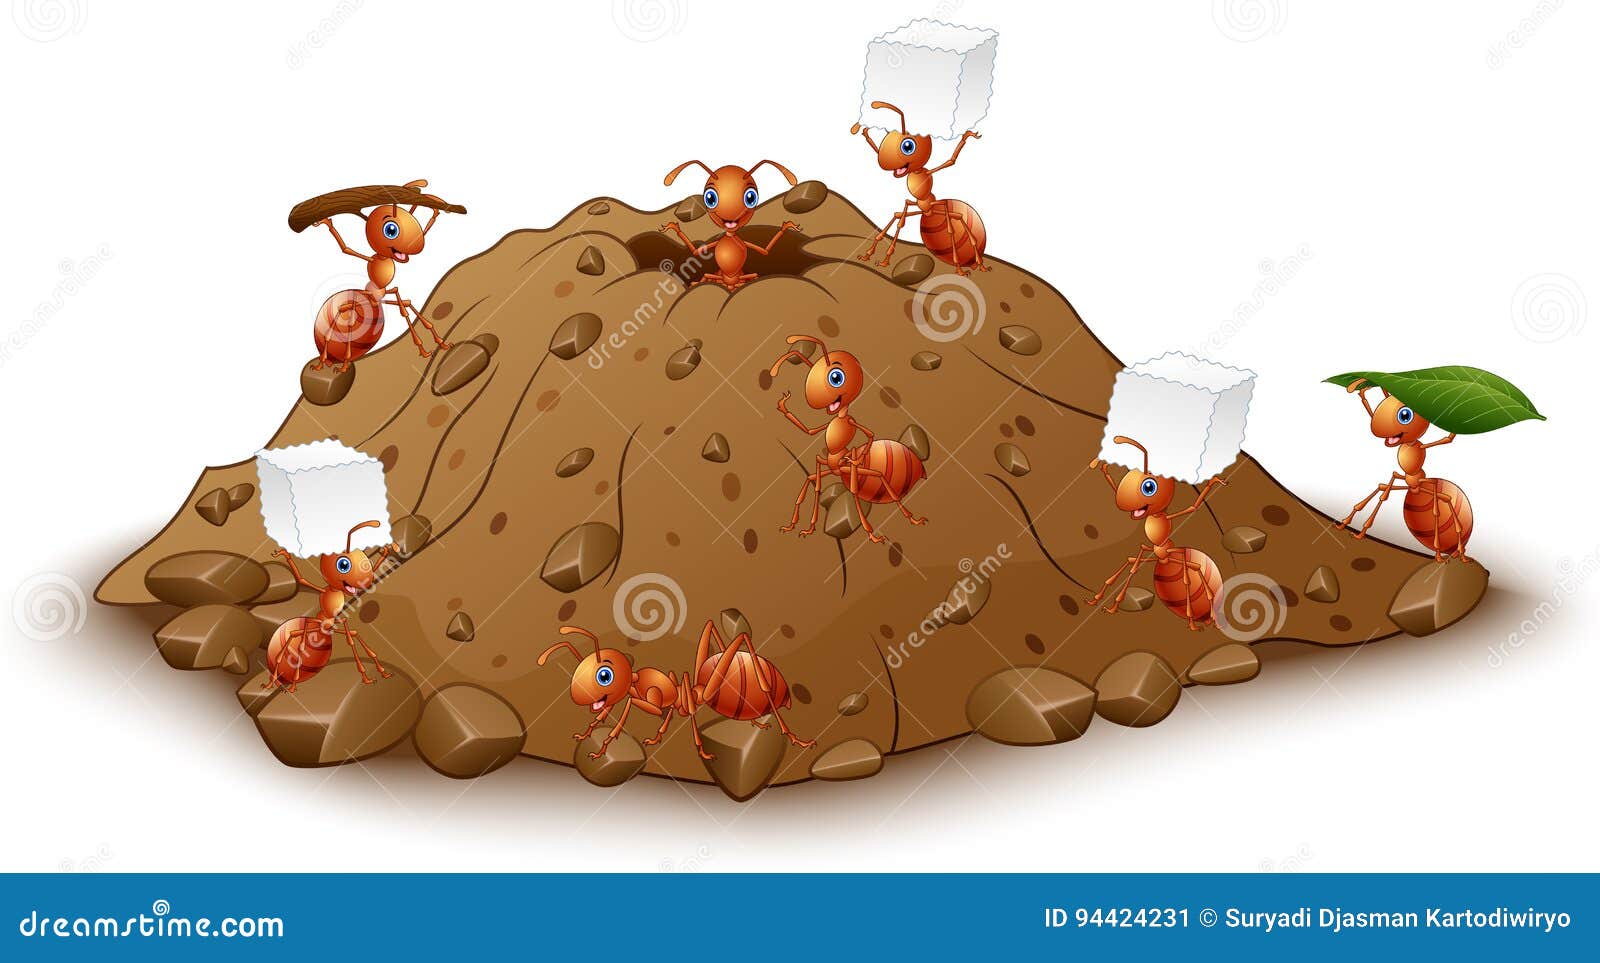 Cartoon Ants Colony with Anthill Stock Vector - Illustration of hole,  educative: 94424231